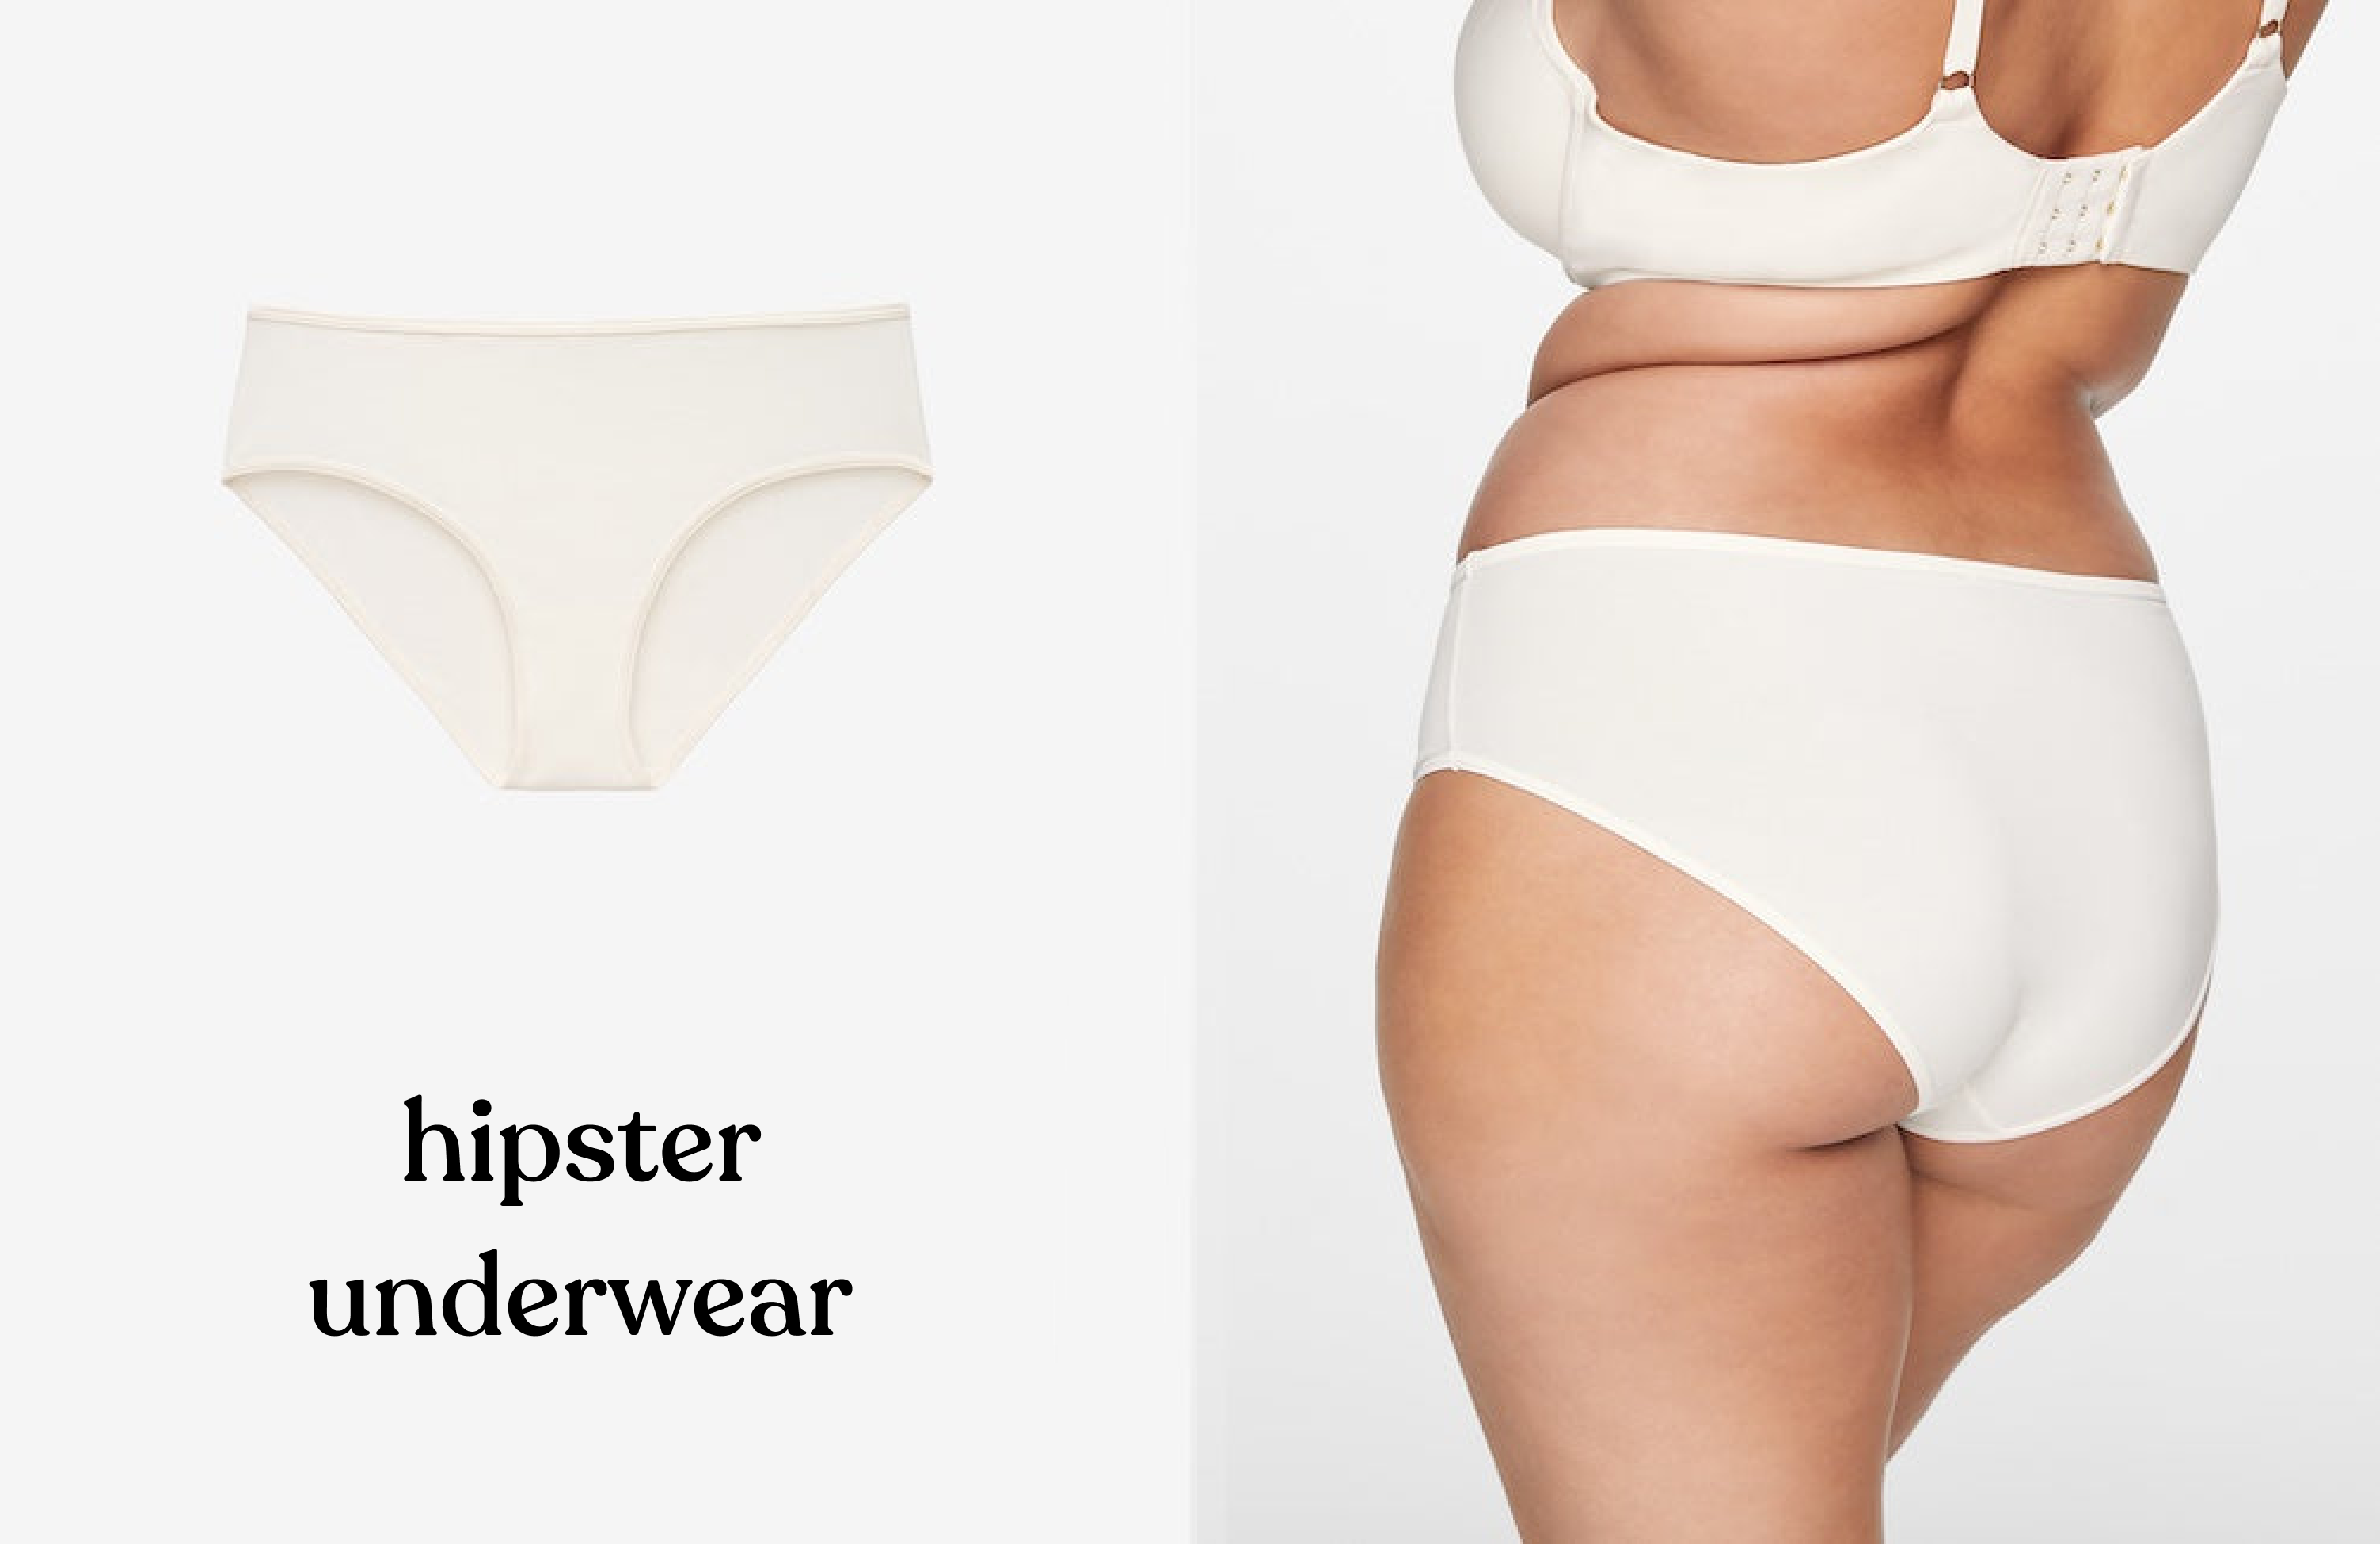 Hipster vs Bikini Underwear: What Are The Differences & Choosing The Best  Style For You - Bikini & Hipster Underwear Characteristics